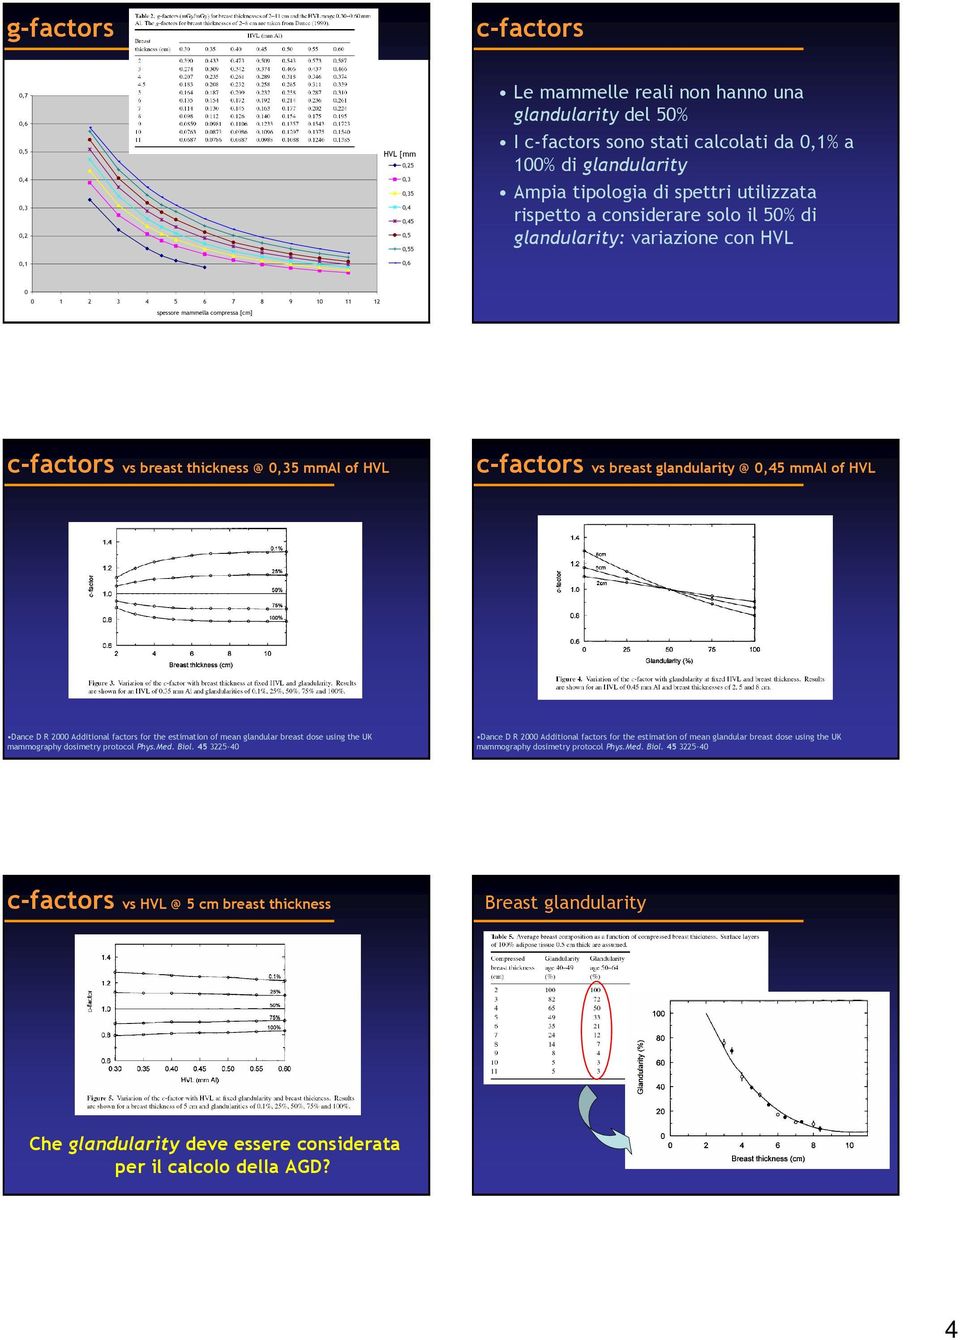 c-factors vs breast thickness @ 0,35 mmal of HVL c-factors vs breast glandularity @ 0,45 mmal of HVL Dance D R 2000 Additional factors for the estimation of mean glandular breast dose using the UK